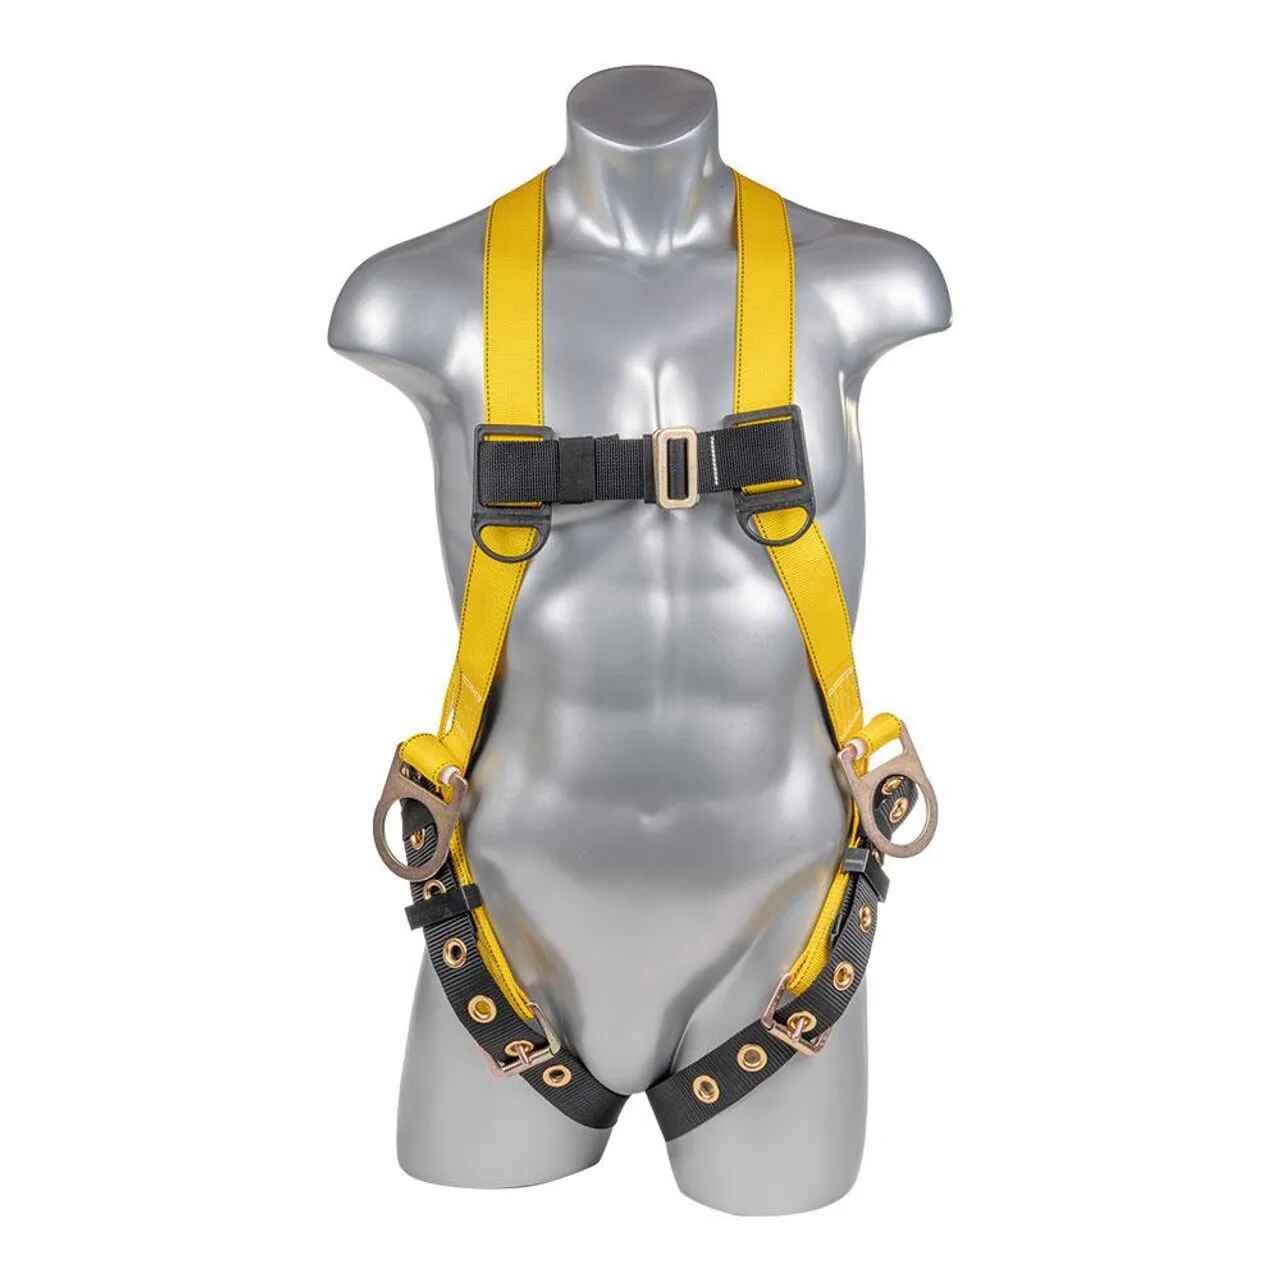 Construction Safety Harness 3 Point, Grommet Legs, Backside D-Rings - Defender Safety